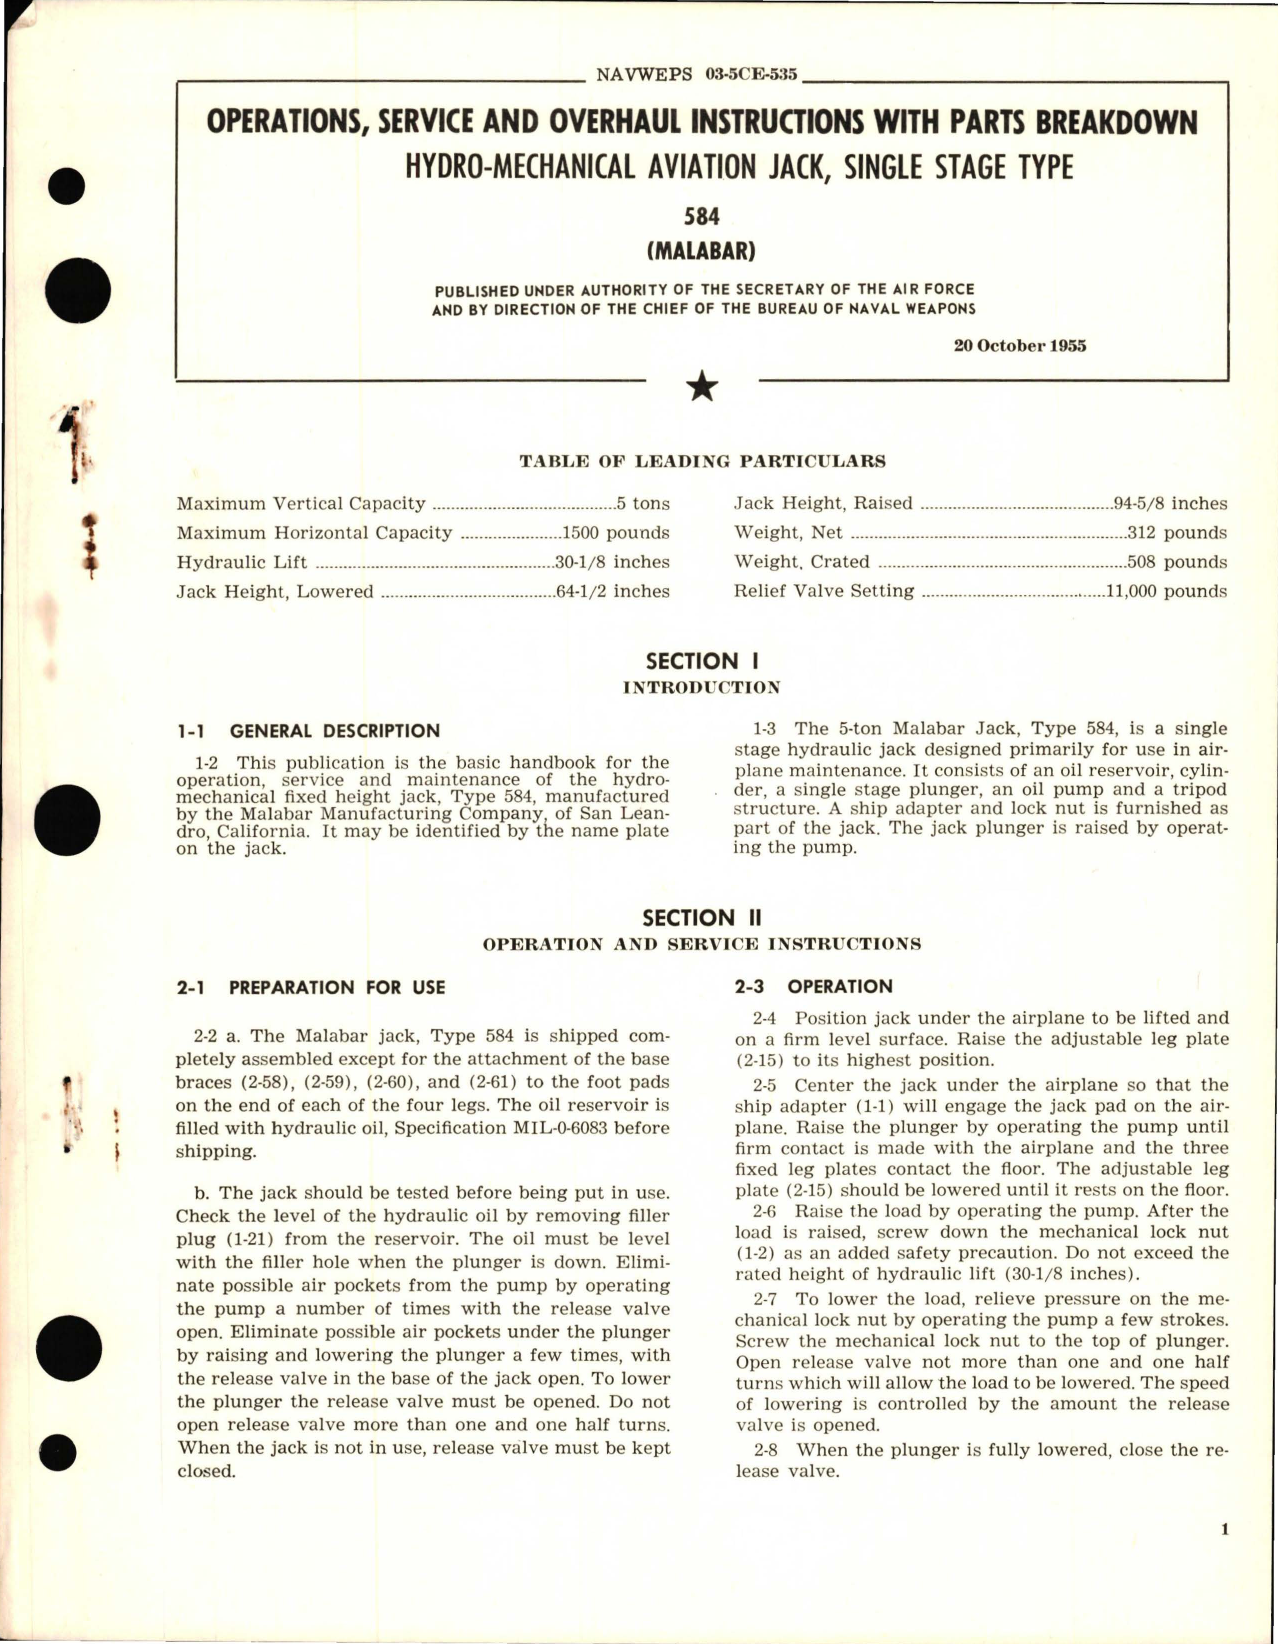 Sample page 1 from AirCorps Library document: Operations, Service and Overhaul Instructions with Parts Breakdown for Hydro Mechanical Aviation Jack, Single Stage Type 584